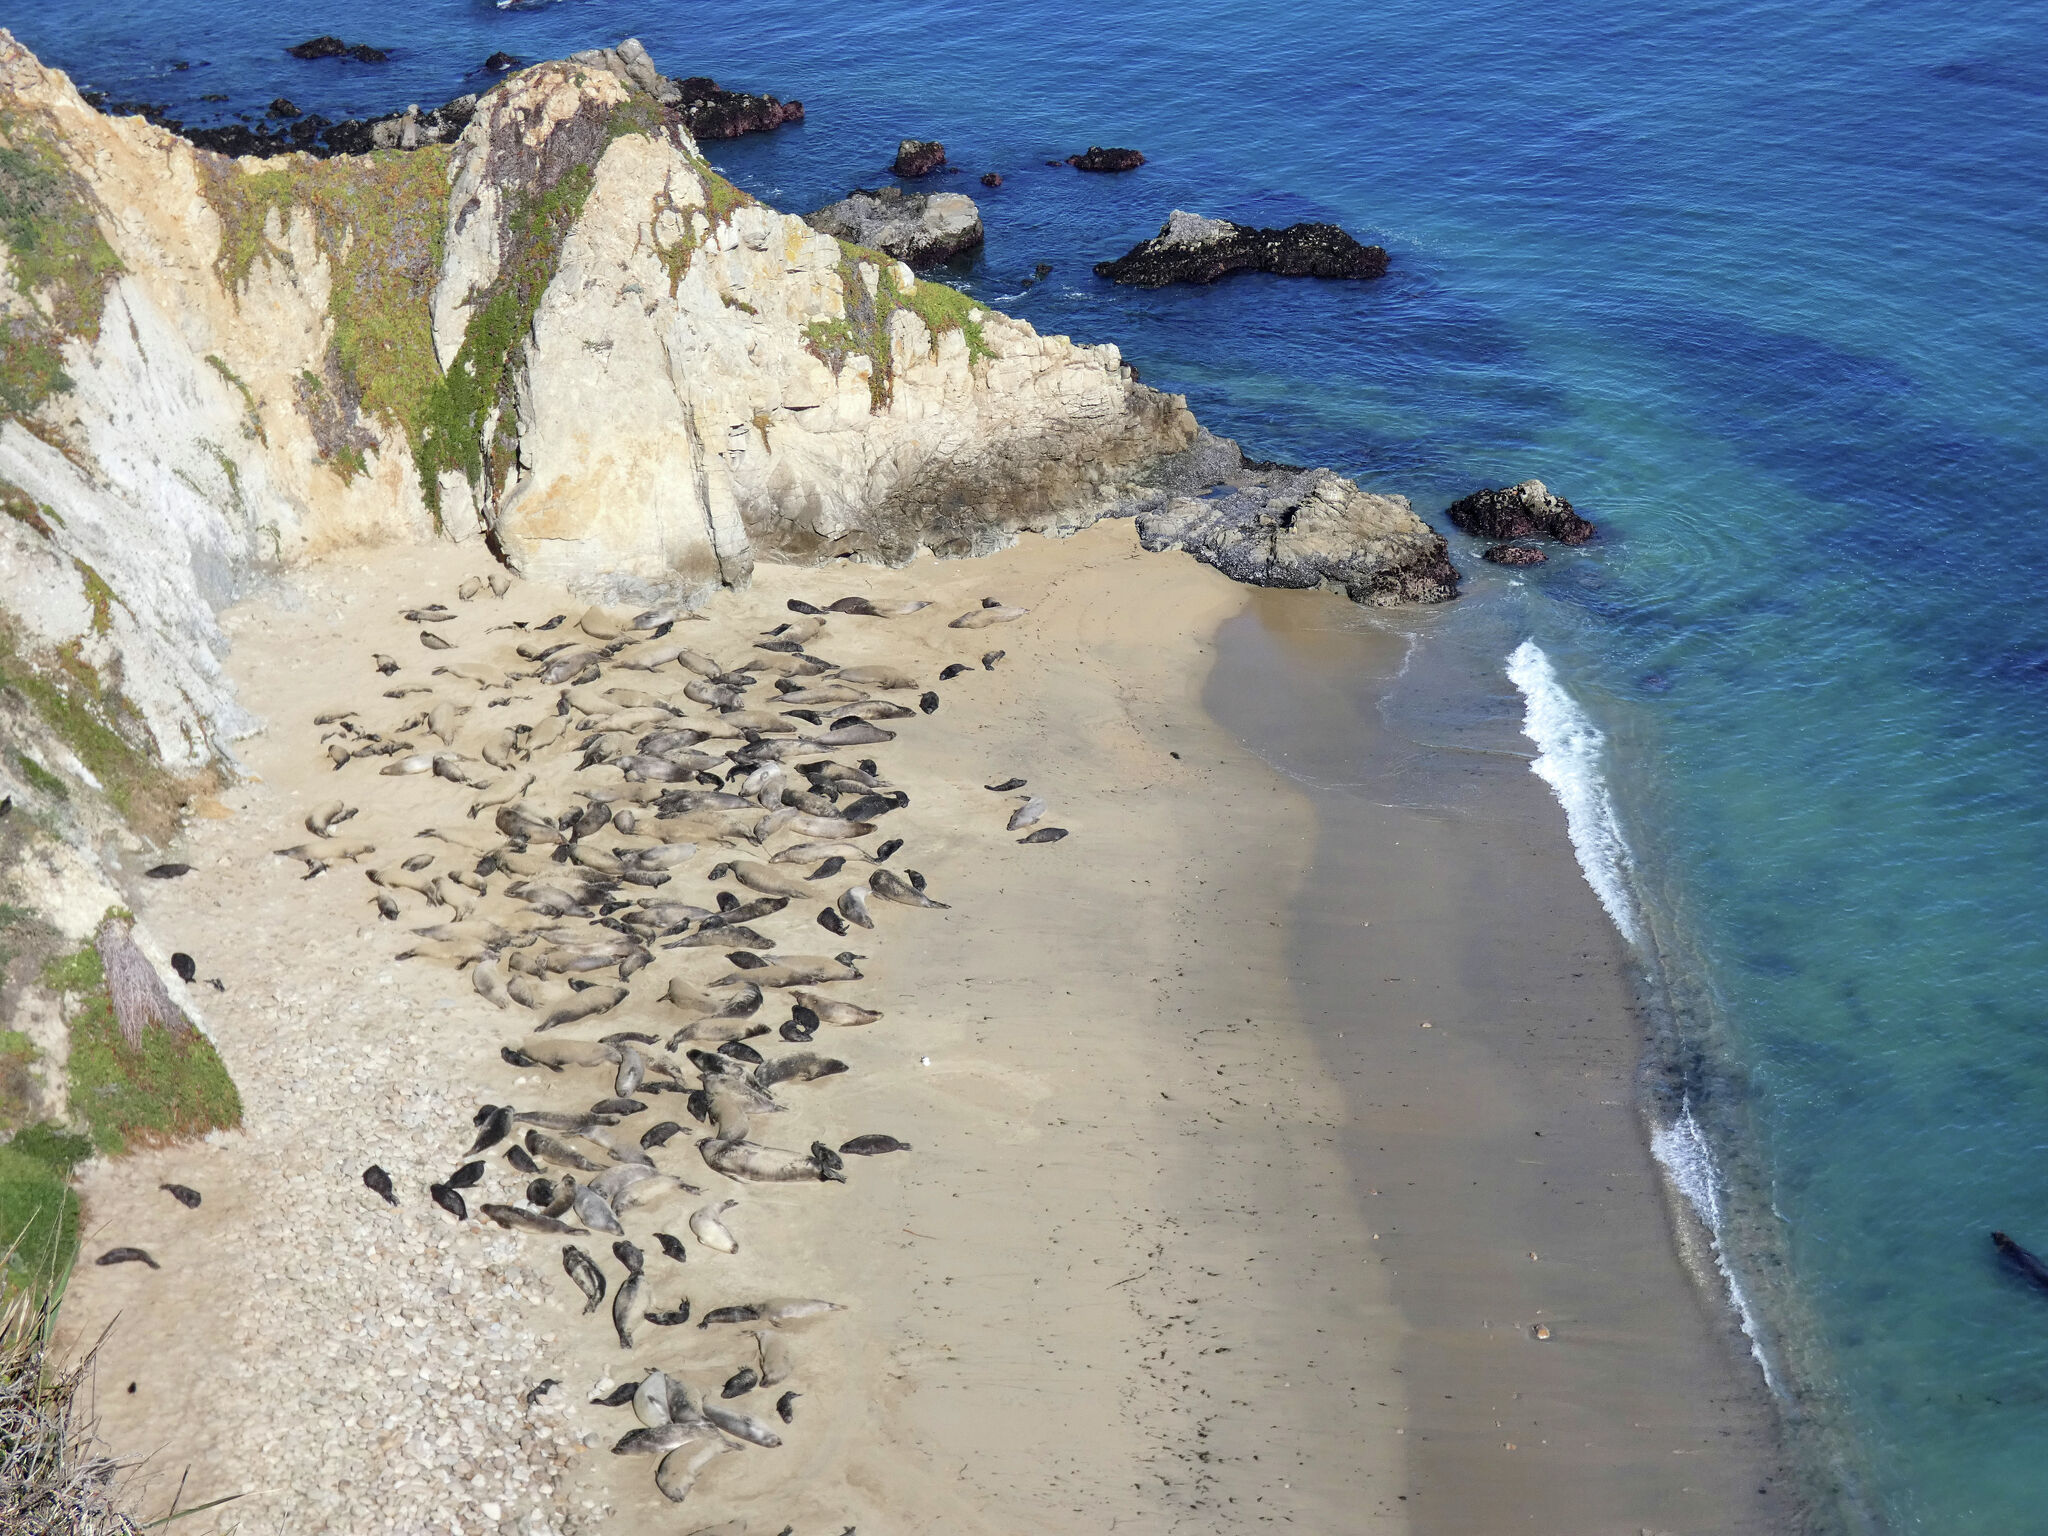 Elephant seals at Point Reyes: Seals take over Drakes Beach in California  that was closed during government shutdown - CBS News